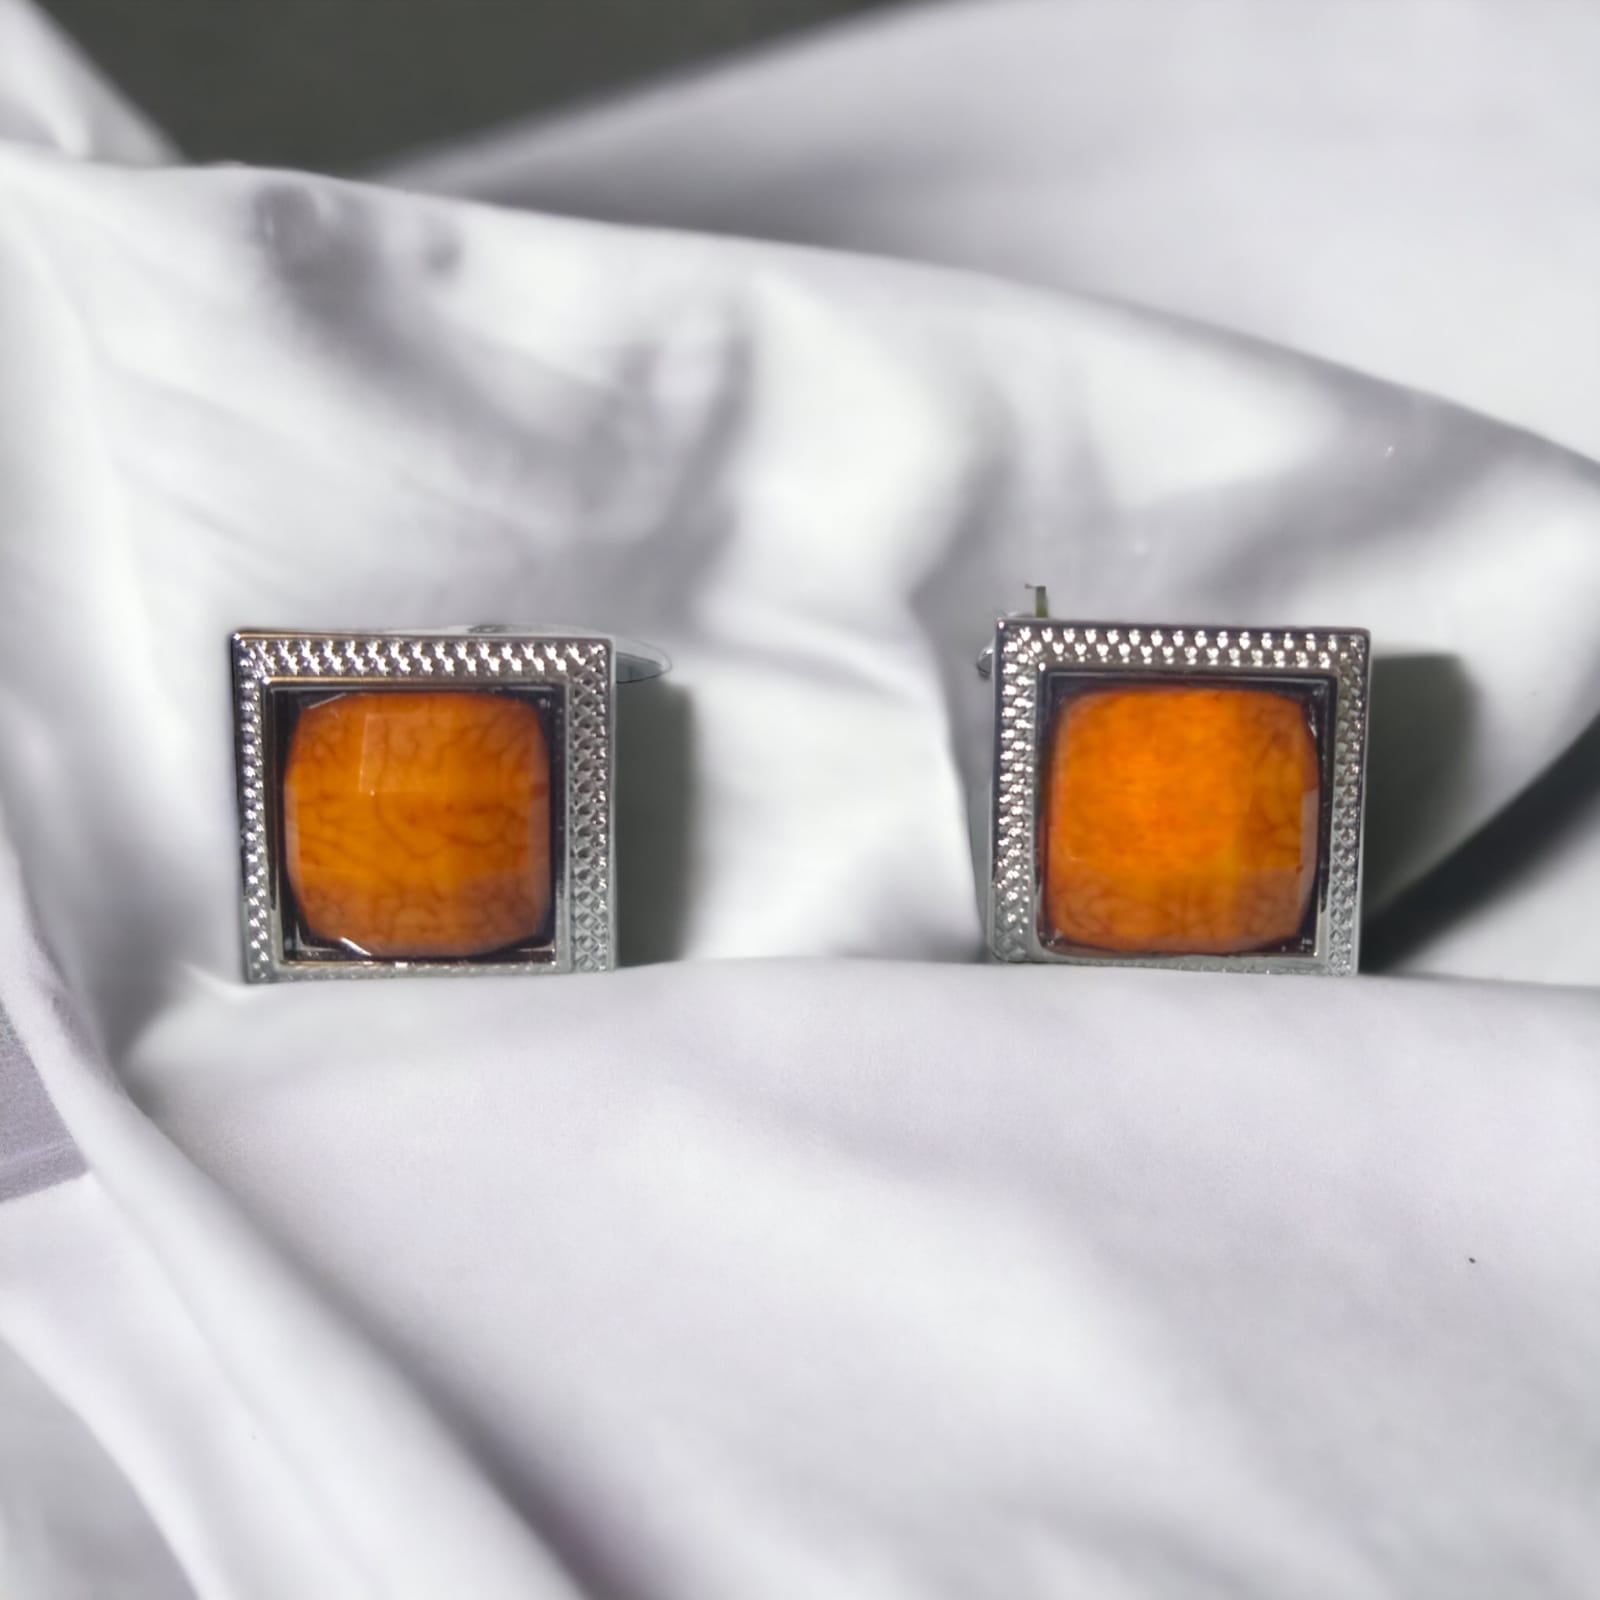 Sophistication in Silver: Stone-Adorned Cufflinks Collection with Elegant Black Box